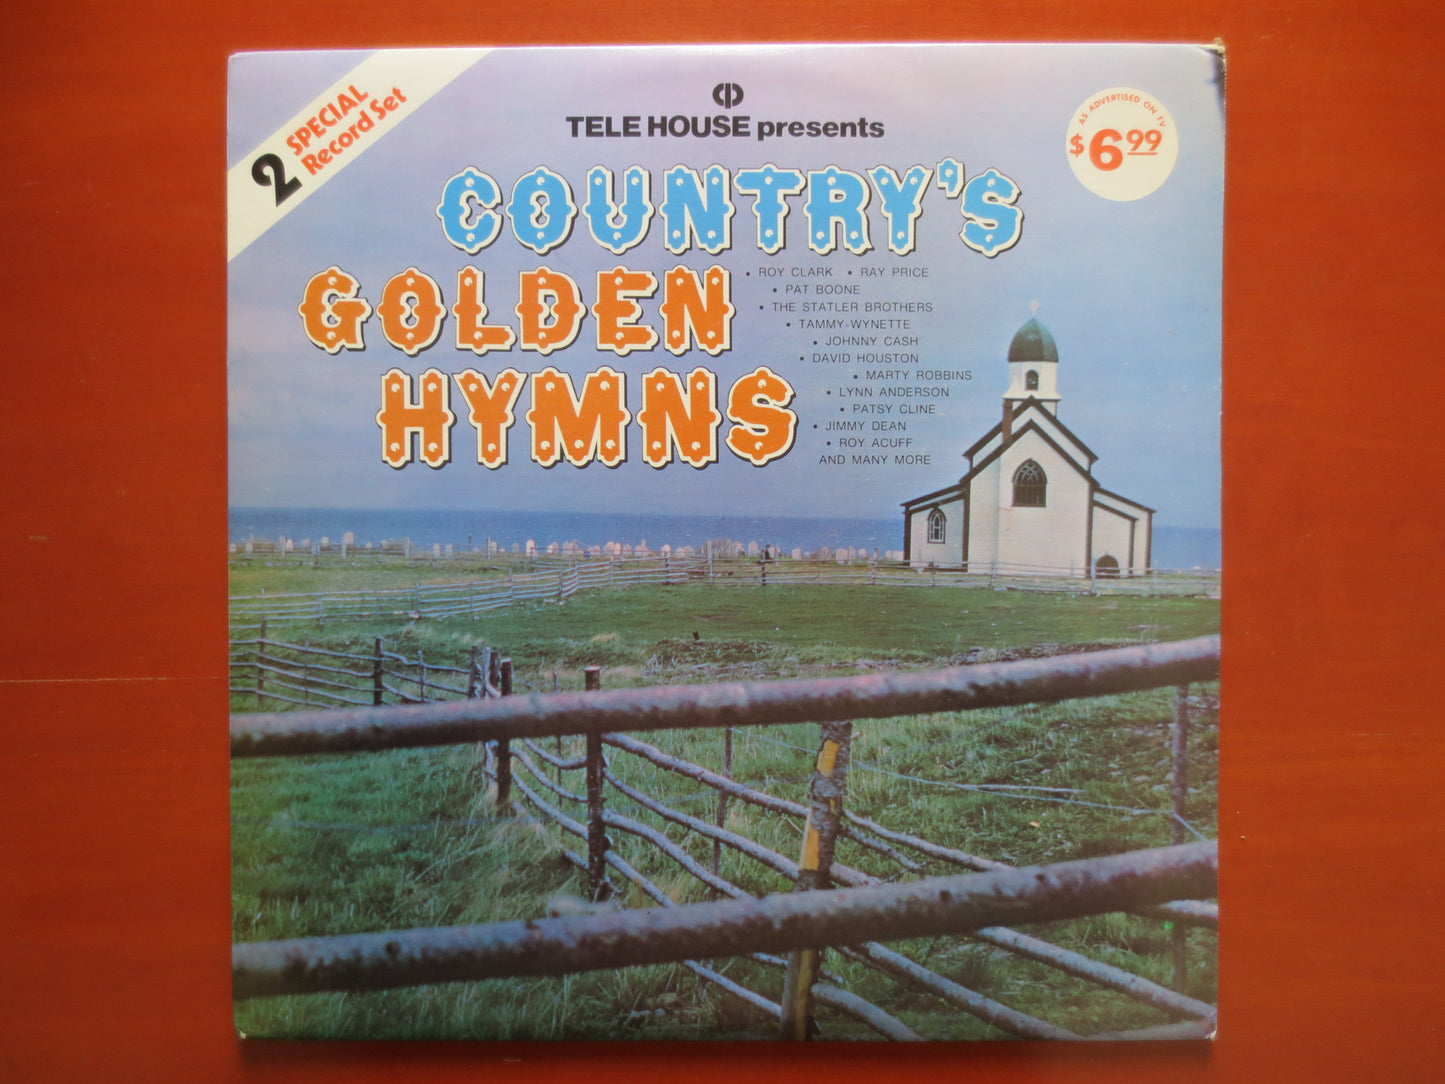 COUNTRY MUSIC, RECORDS, Country Records, Vintage Vinyl, Record Vinyl, Vinyl, Vinyl Records, Country Vinyl, 1967 Records